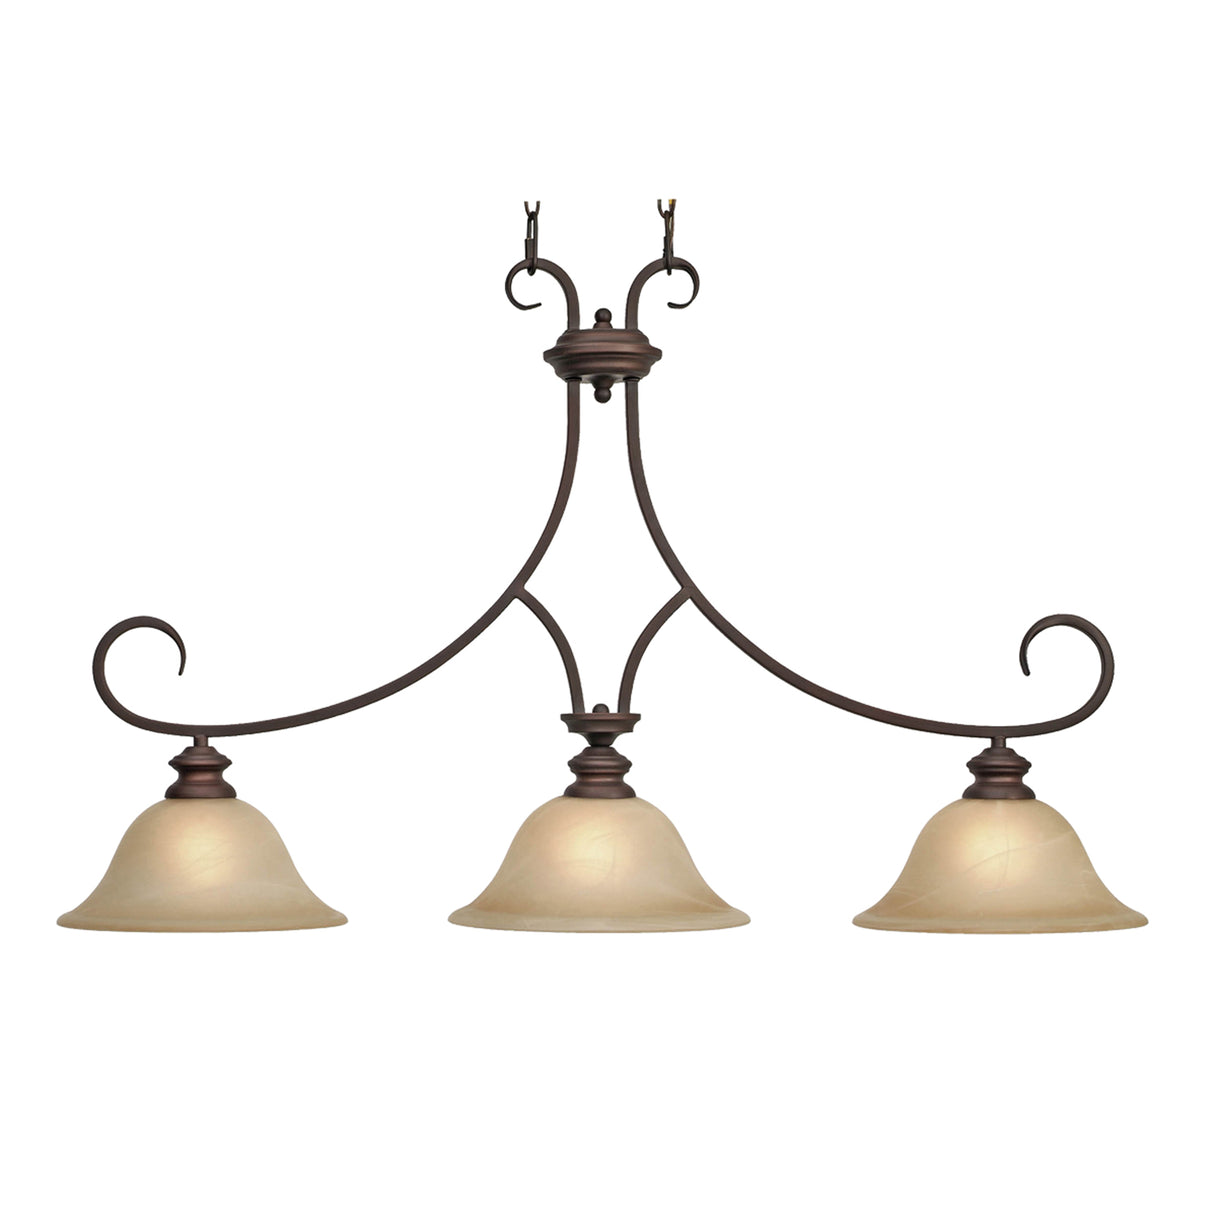 Lancaster 3 Light Linear Pendant in Rubbed Bronze with Antique Marbled Glass